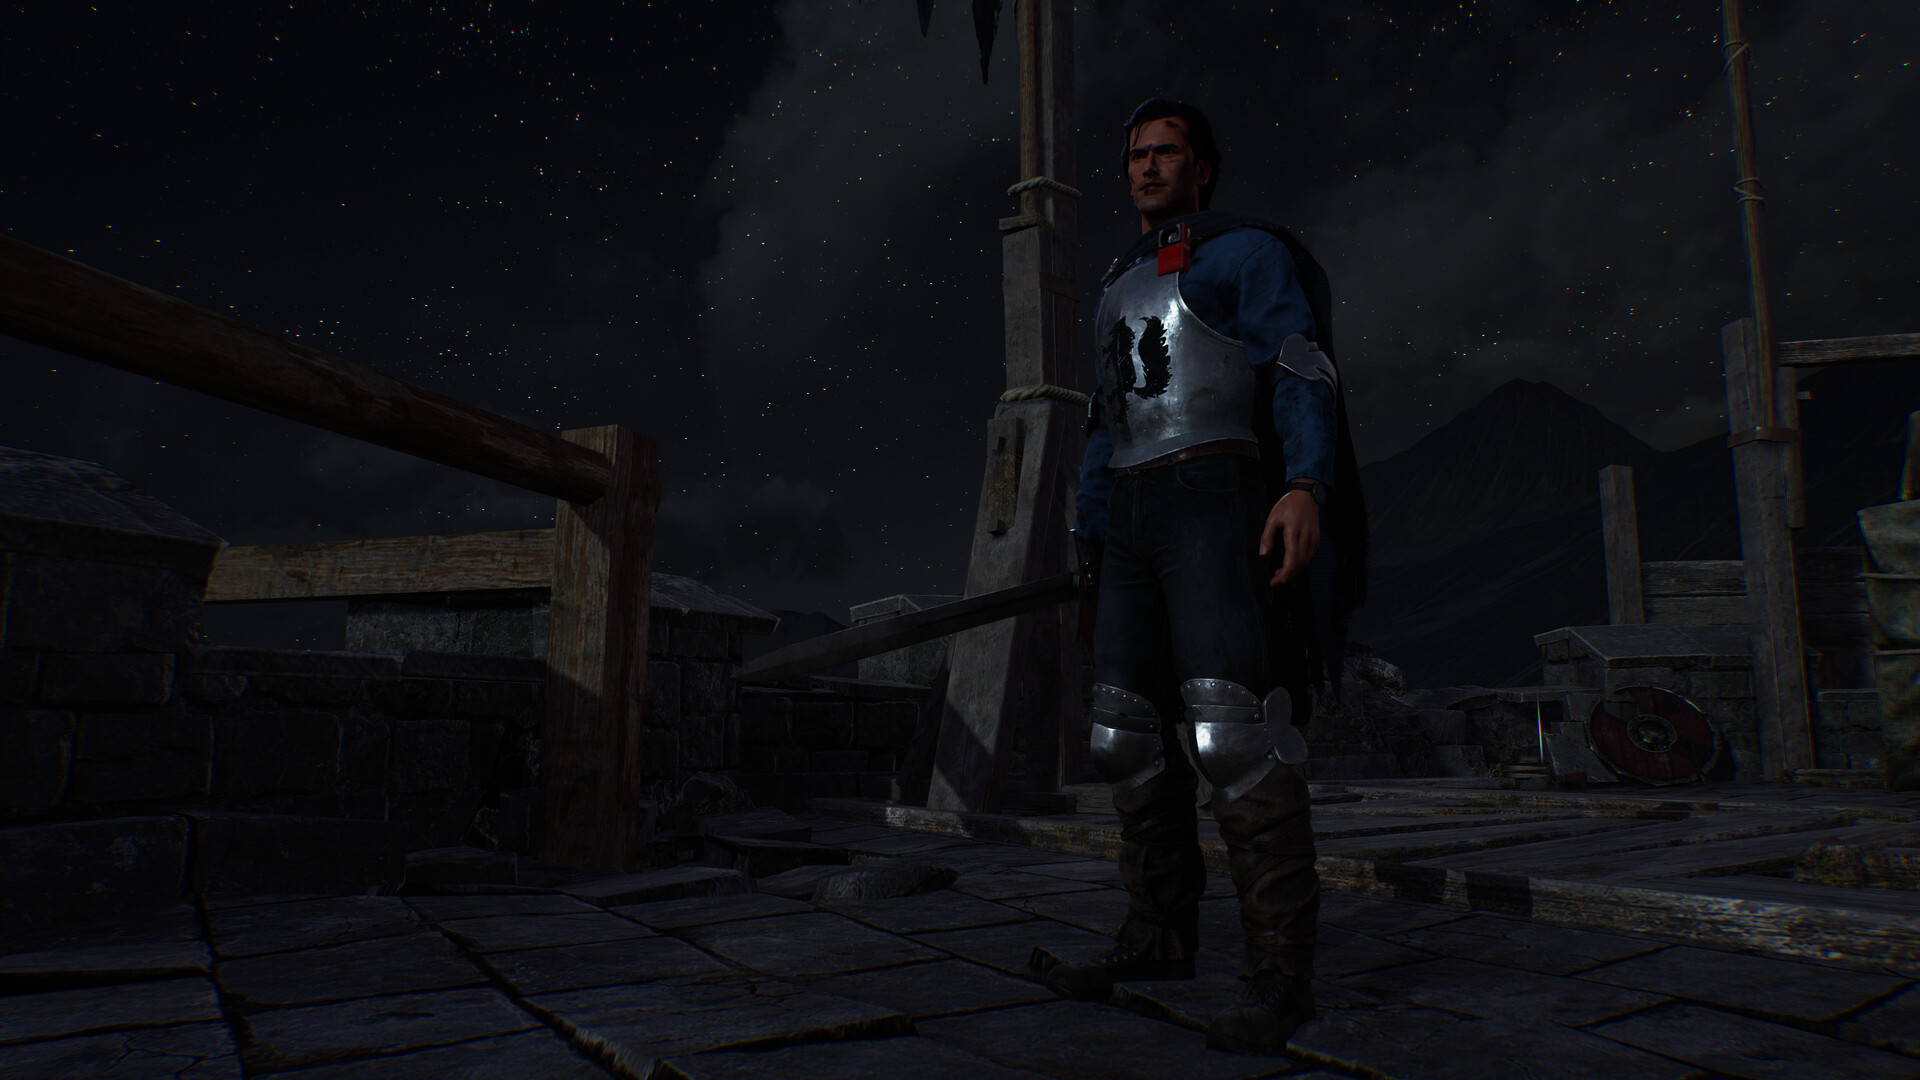 Evil Dead: The Game - Ash Williams Gallant Knight Outfit